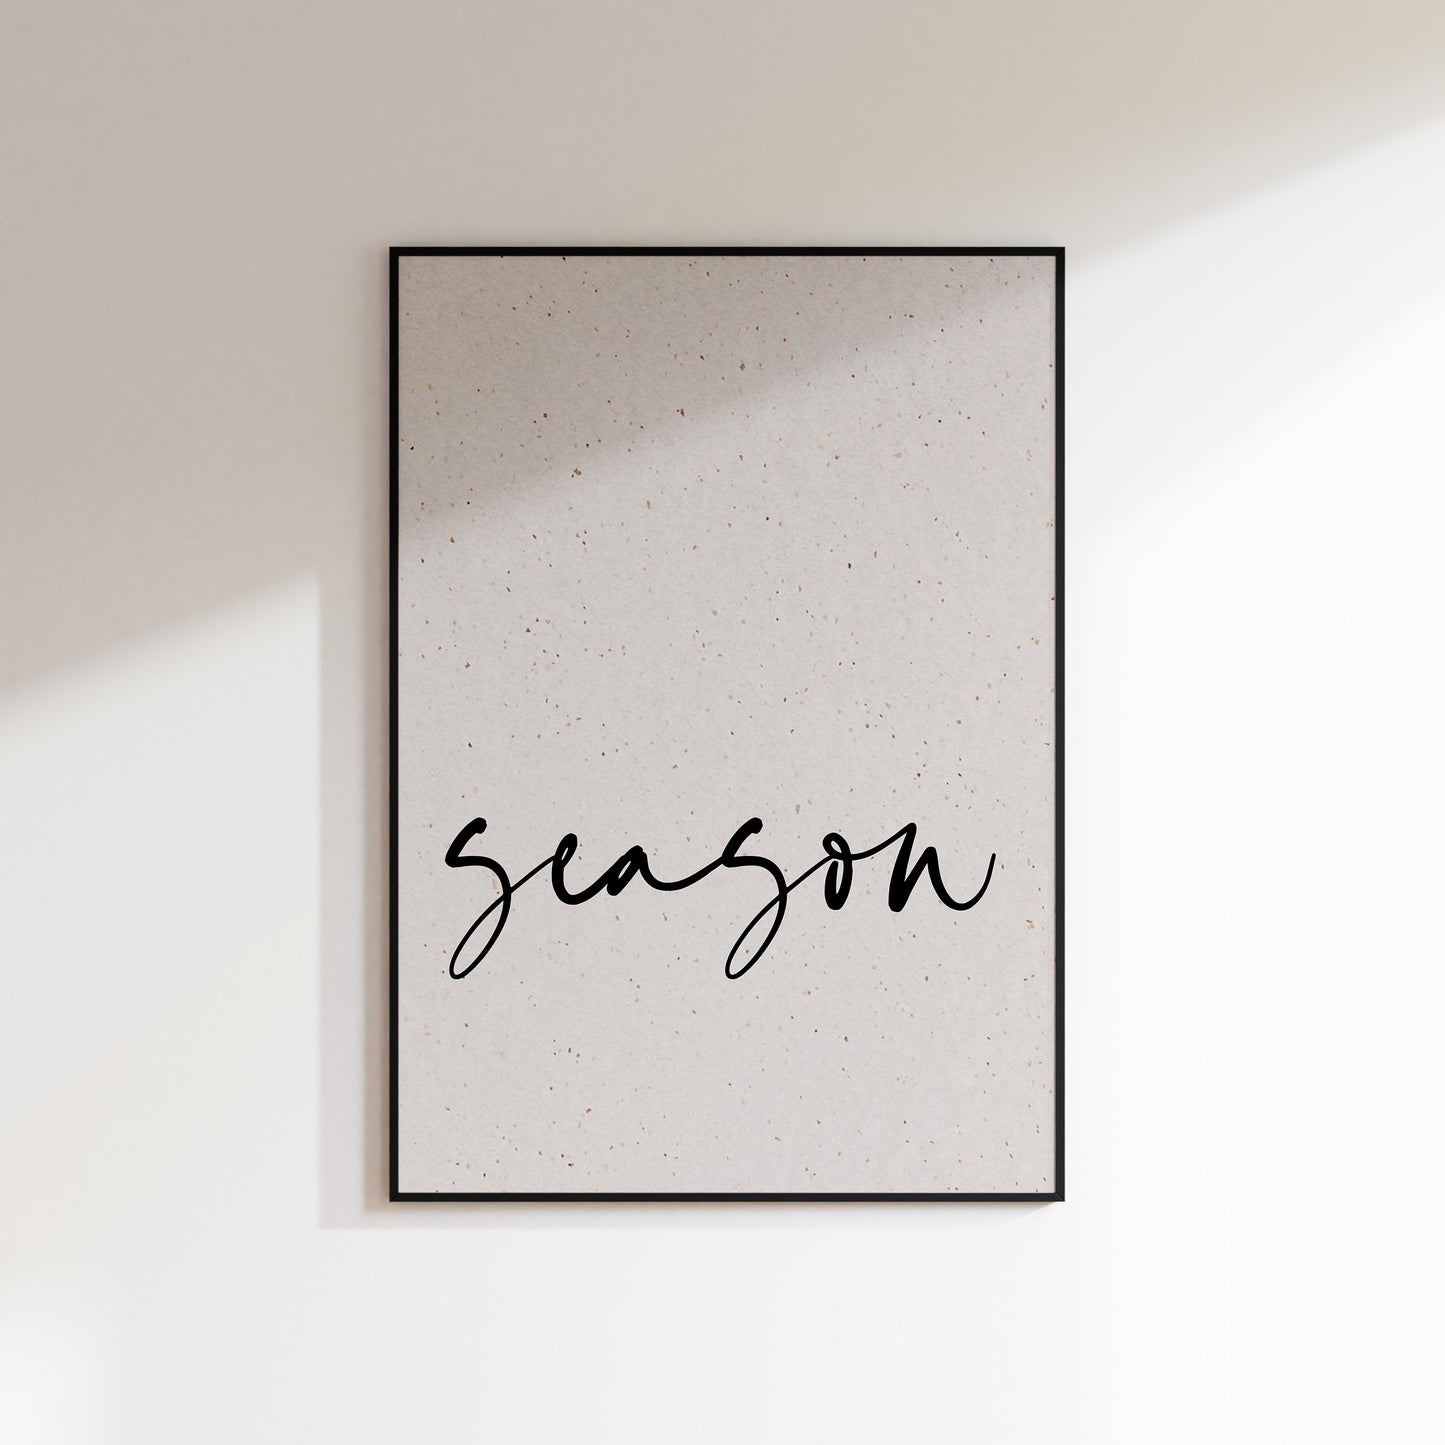 A print on textured paper with black text that reads 'season' in a handwriting style typeface. A culinary print for the kitchen. Print is in a black frame on a white wall background.